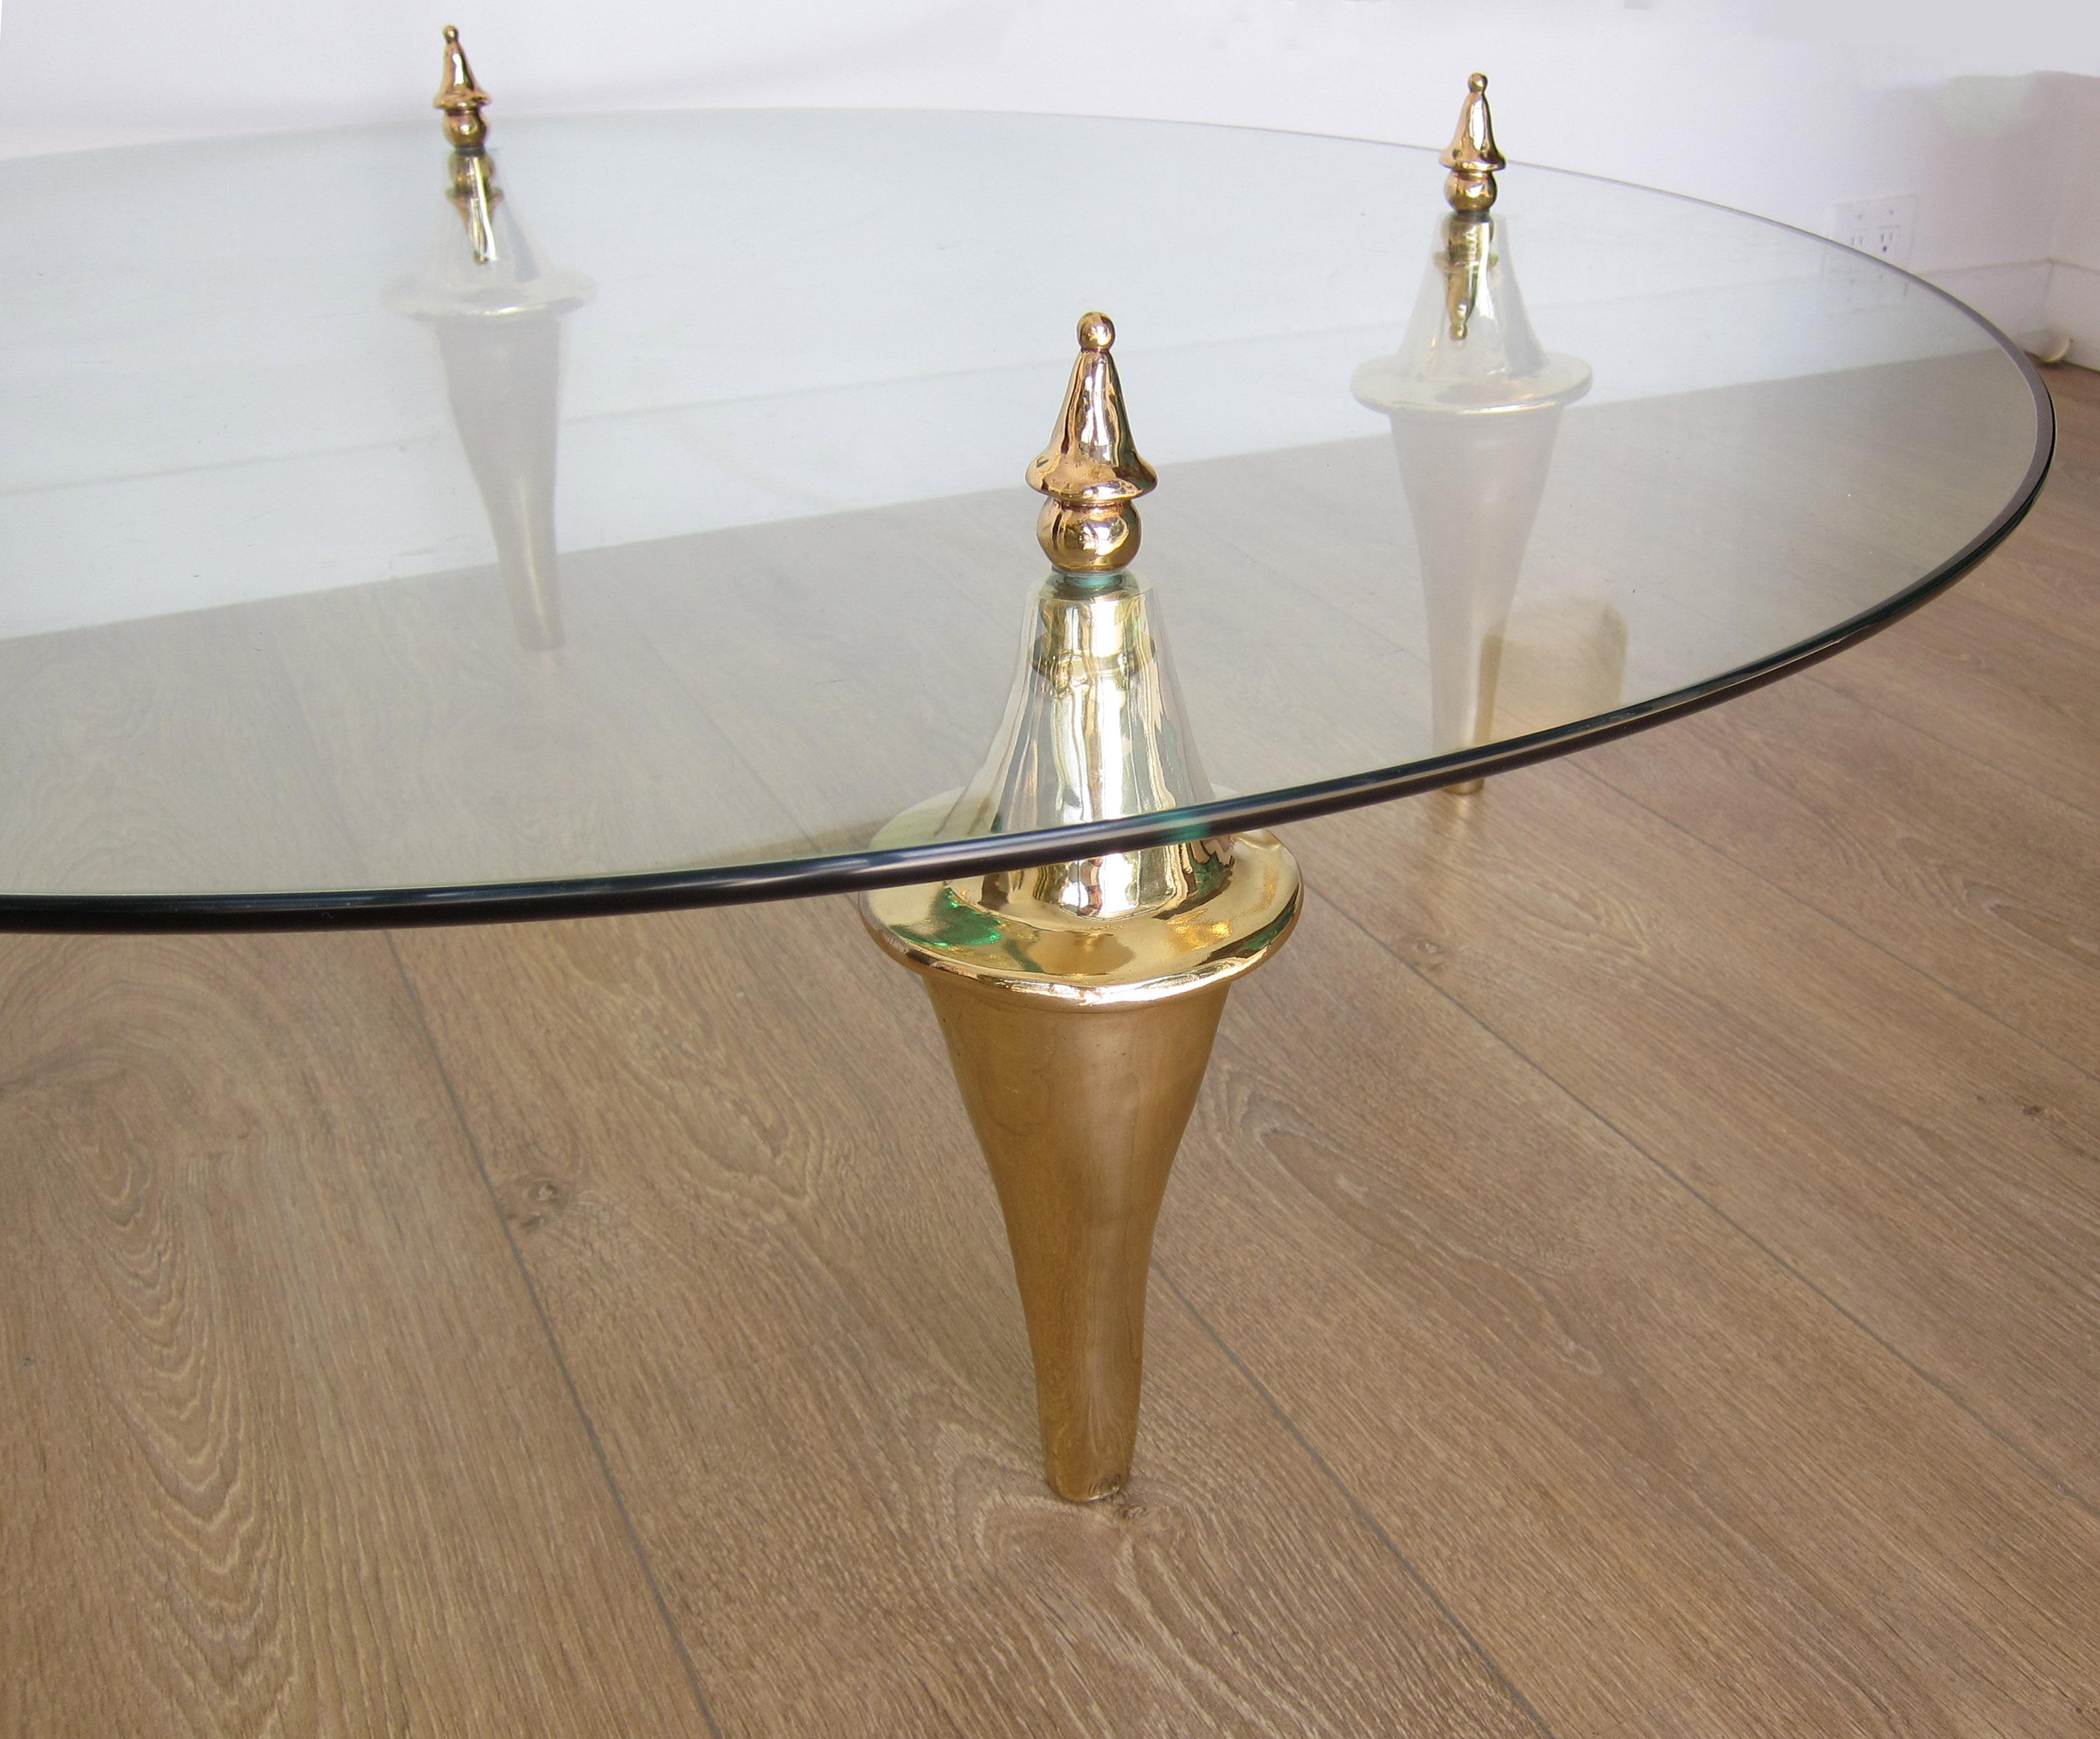 Coffee table by Garouste and Bonetti, model Zeus
Four polished bronze feet,
Thick round glass top
Impressed signature.
Located in our store in Miami ready for shipping.